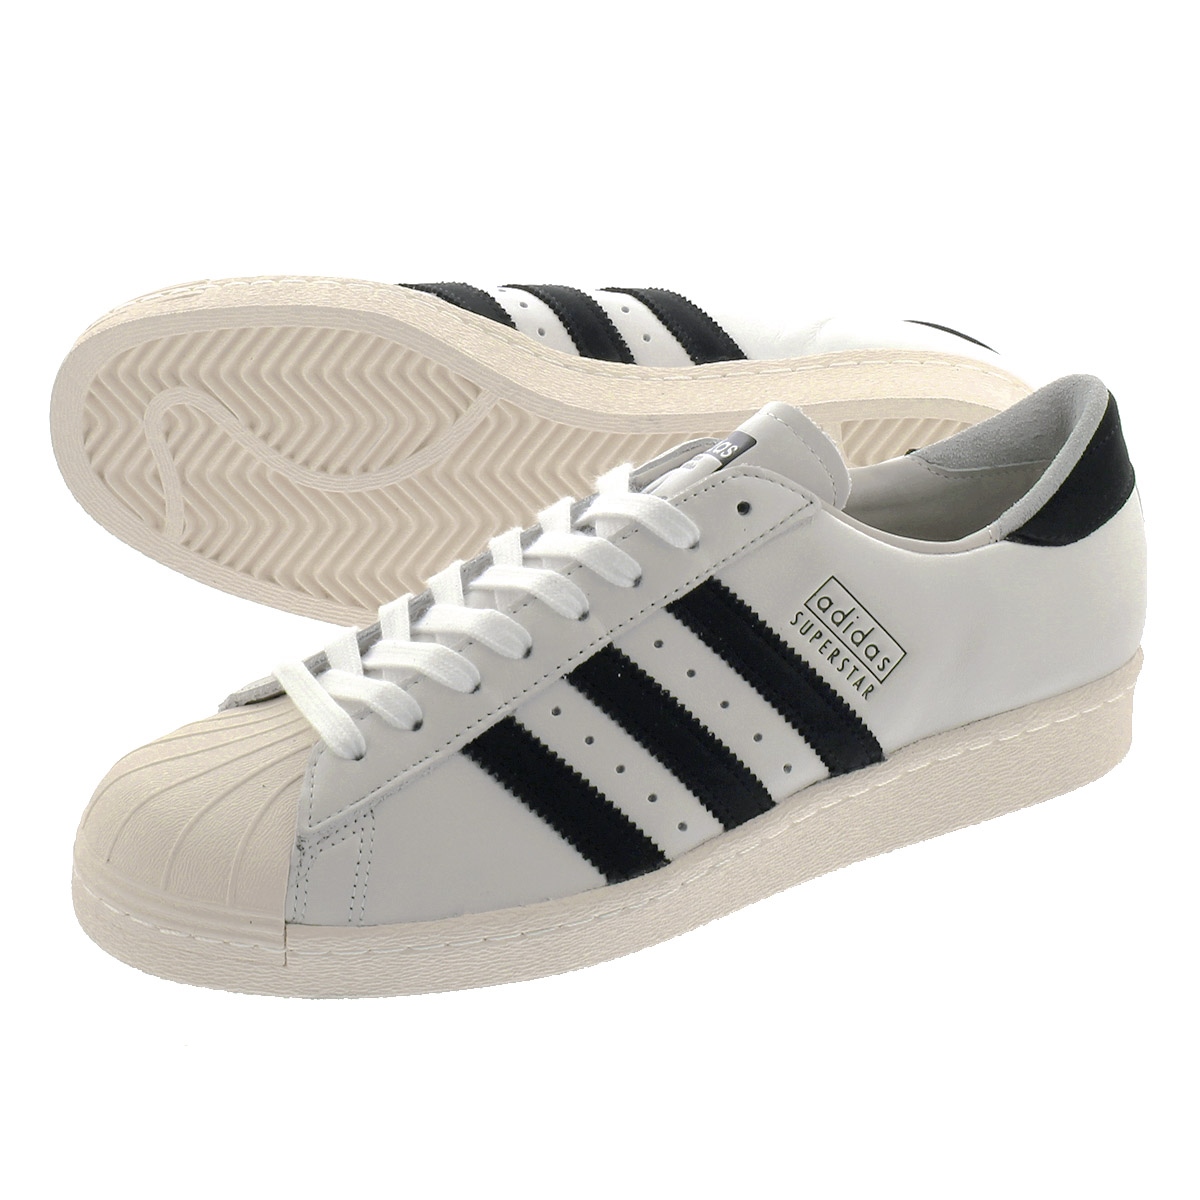 adidas superstar 80s core black off white exclusive